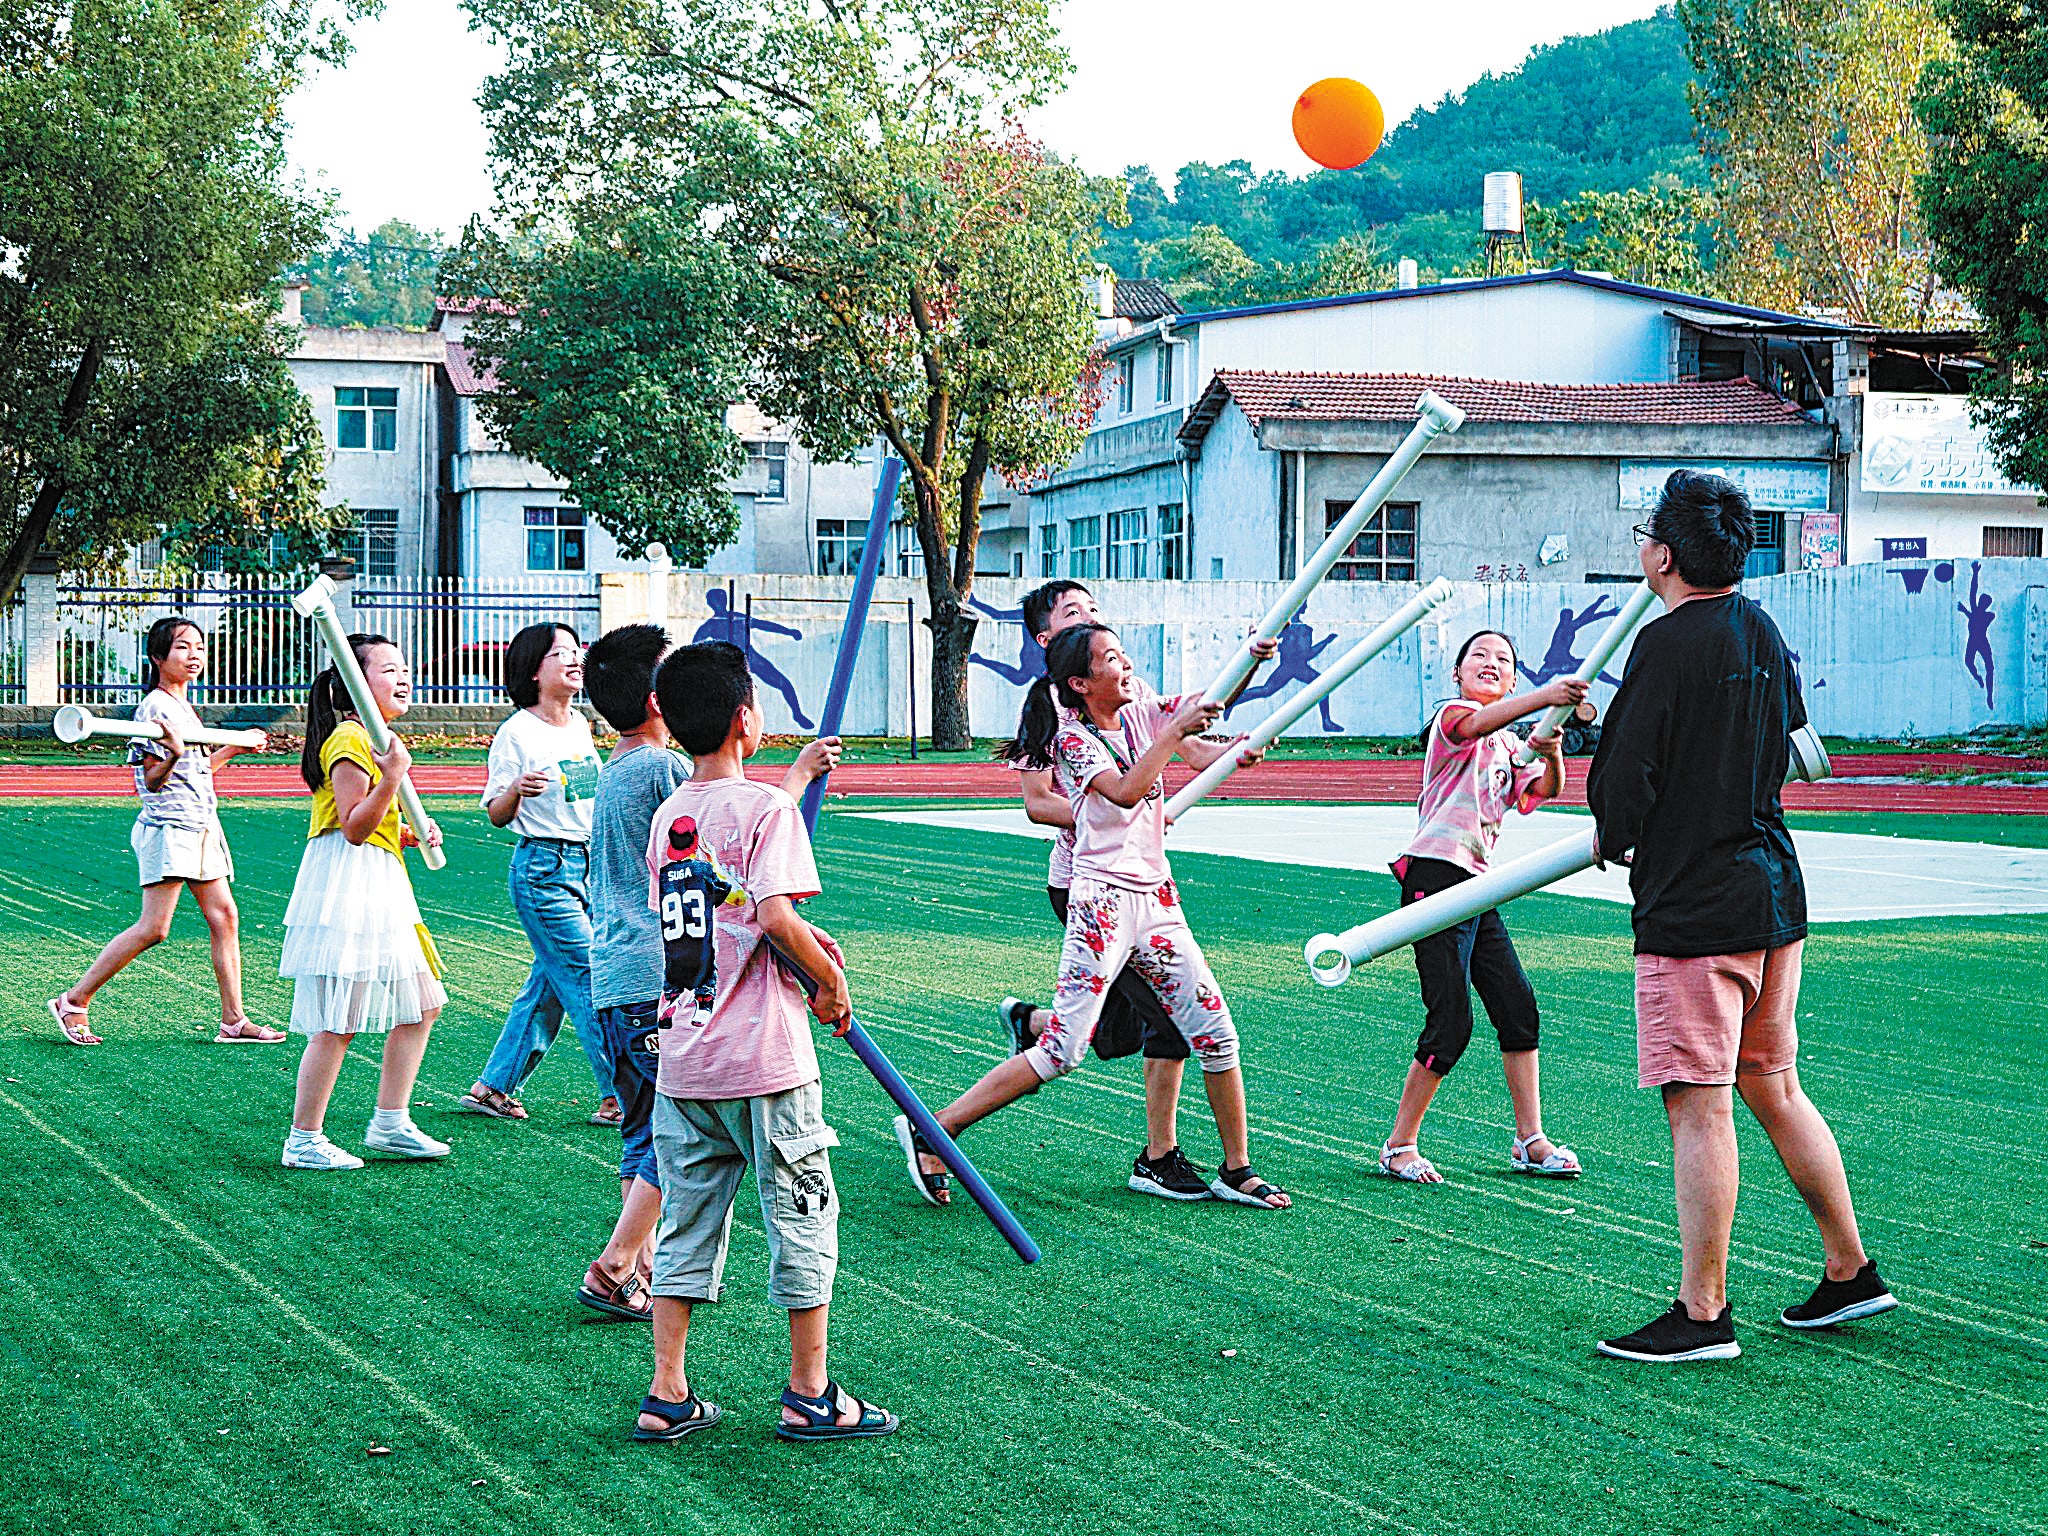 Children enjoy a Quidditch game with plastic drain pipes in the Dabie Mountain area in Hubei province